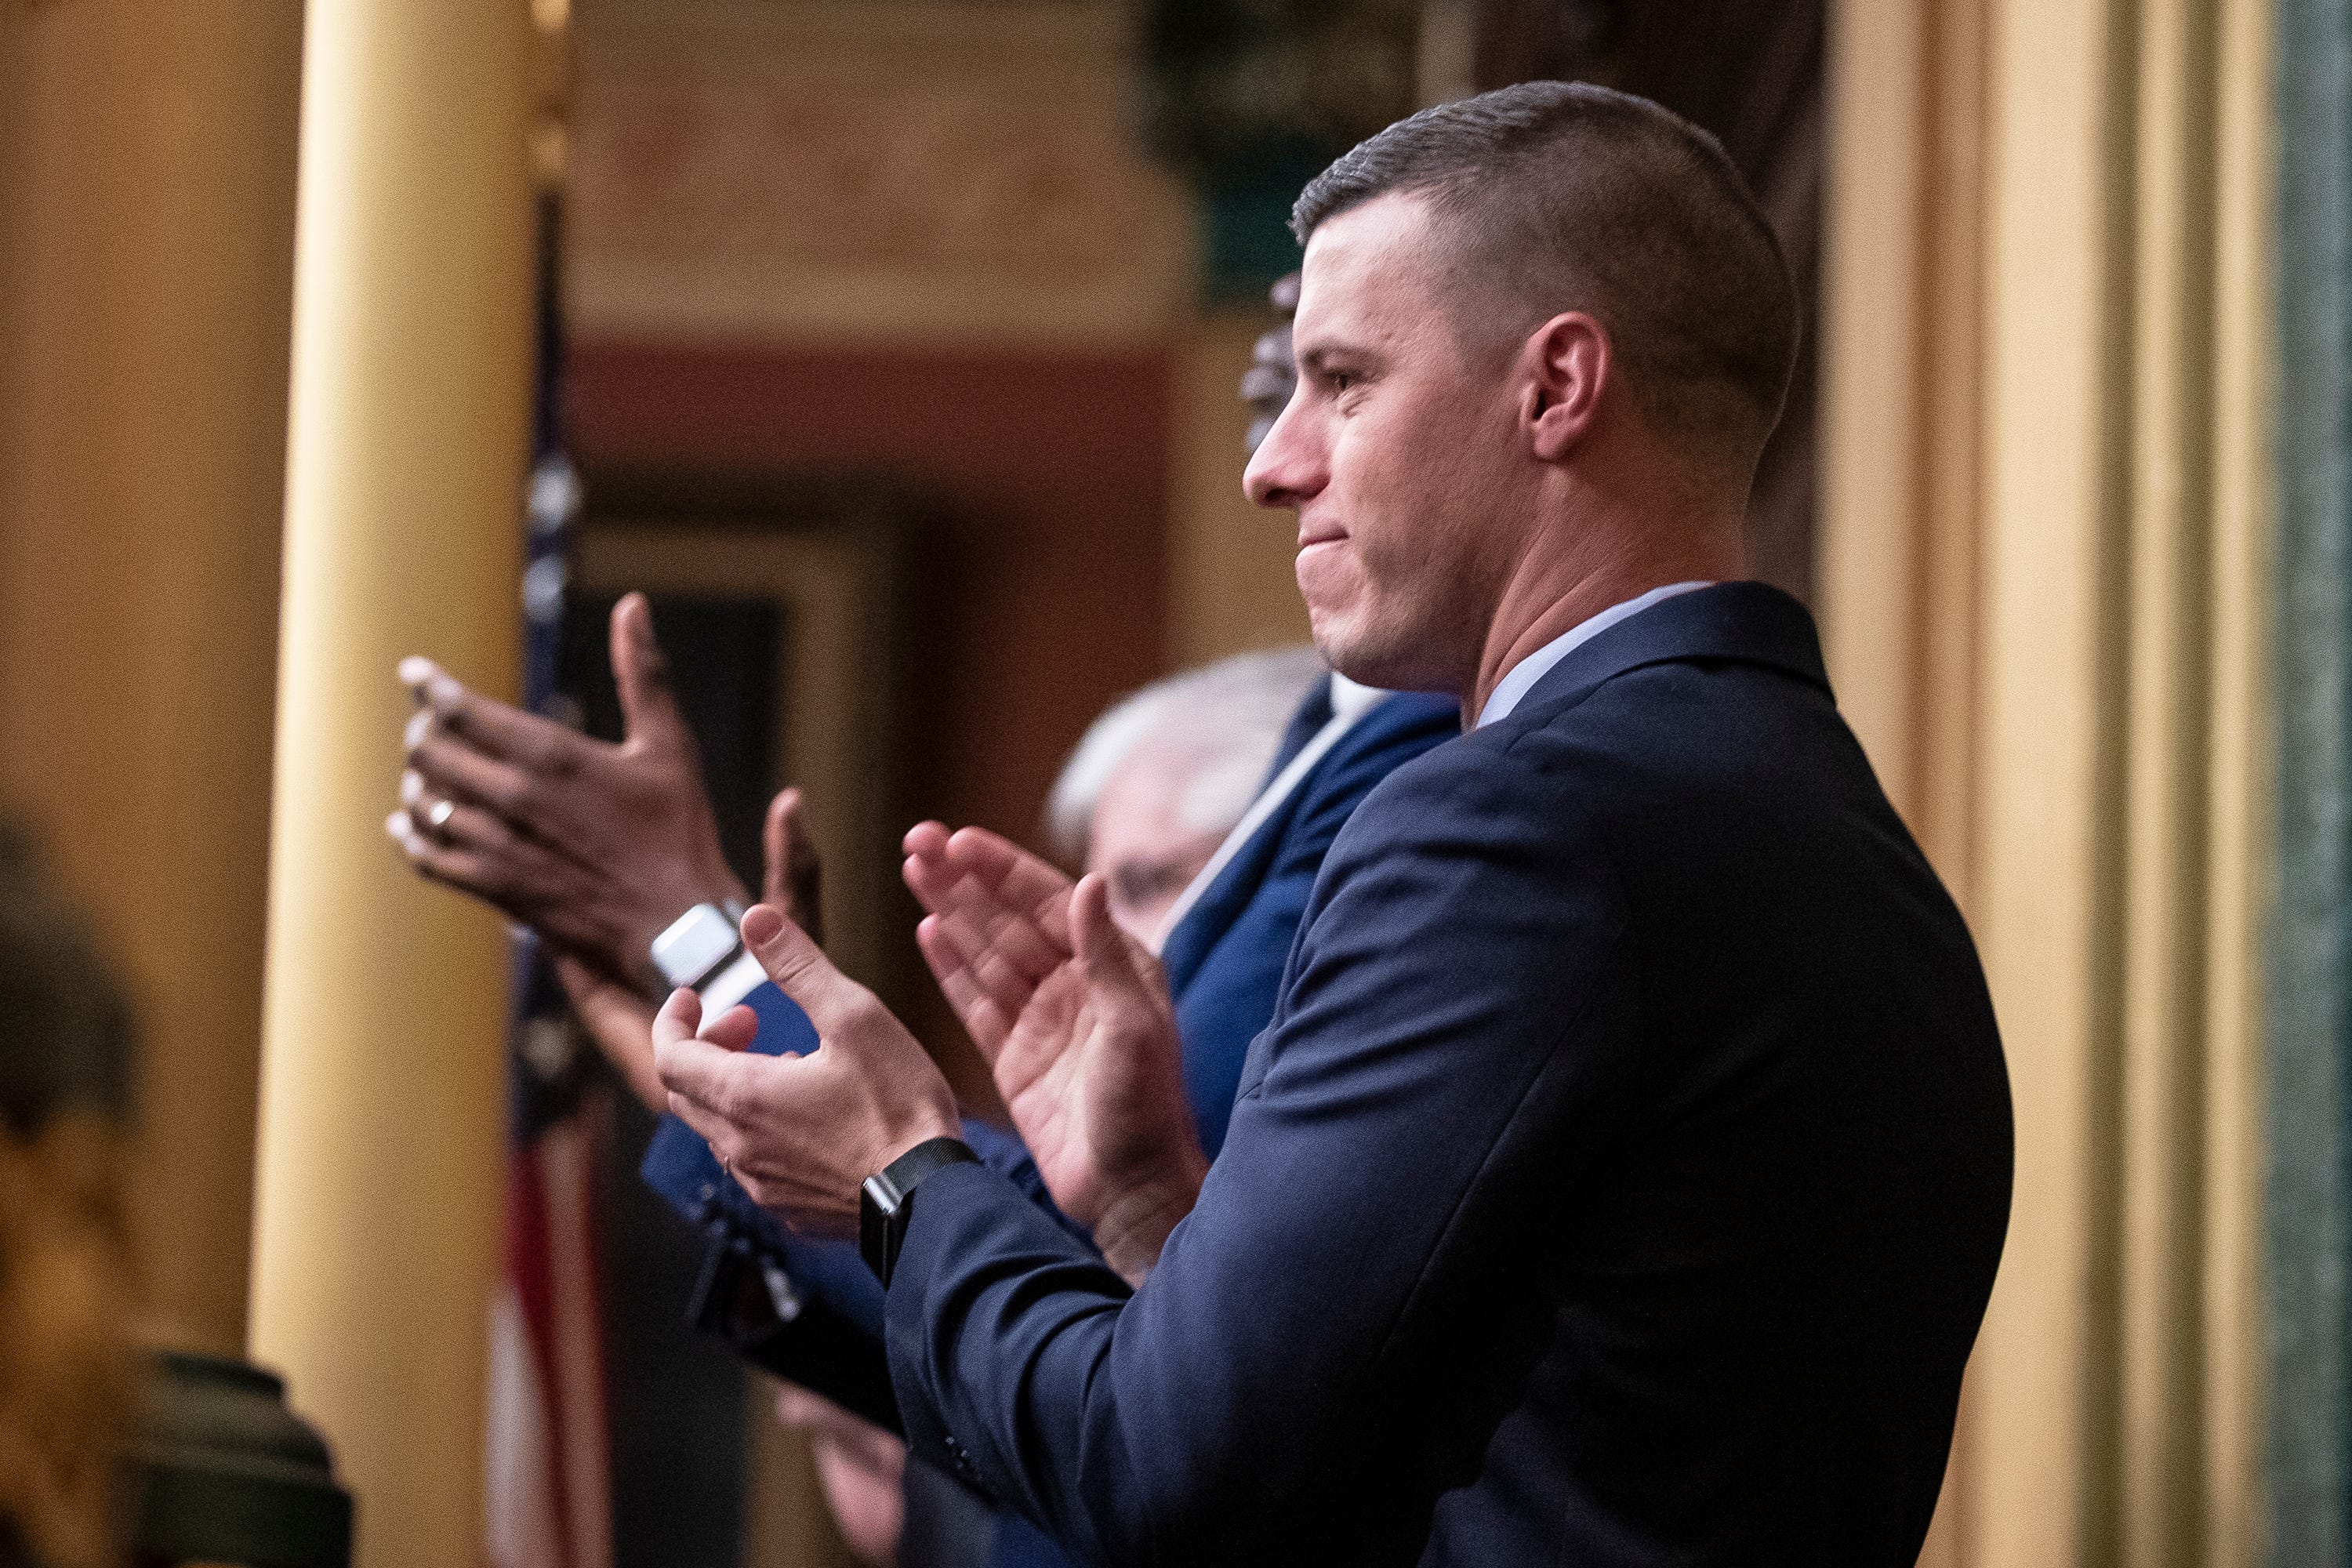 Speaker of the House Lee Chatfield applauds for Governor Gretchen Whitmer during the State of the State address at the State Capitol in Lansing, Wednesday, Jan. 29, 2020.